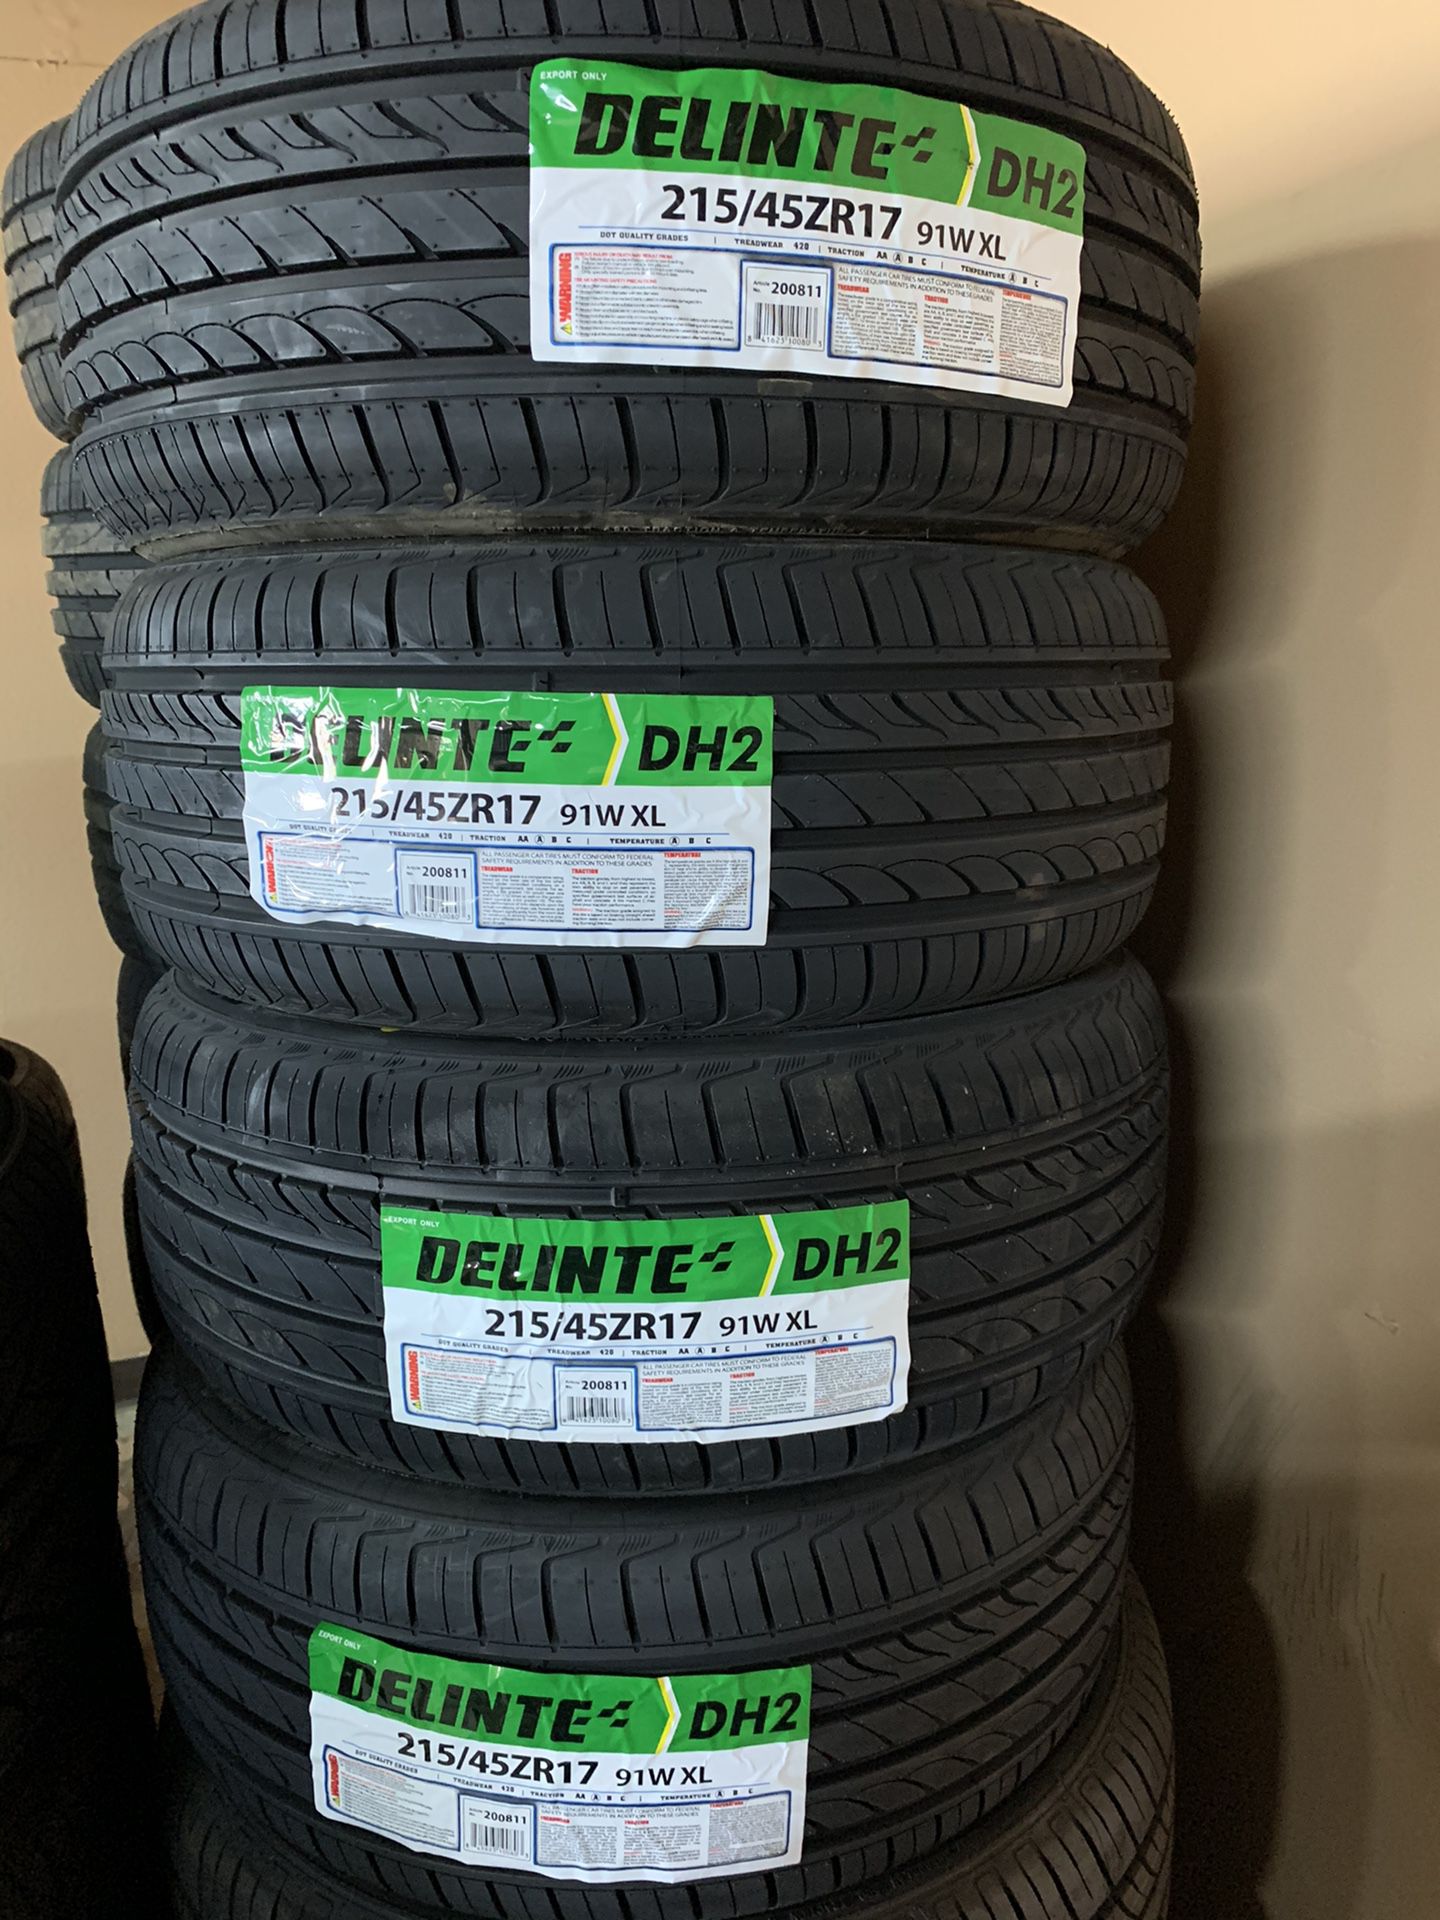 🔥new tires most small cars all four for under $299 we beat everyone’s price visit us 32606 rd 124 Visalia 93291🔥🔥